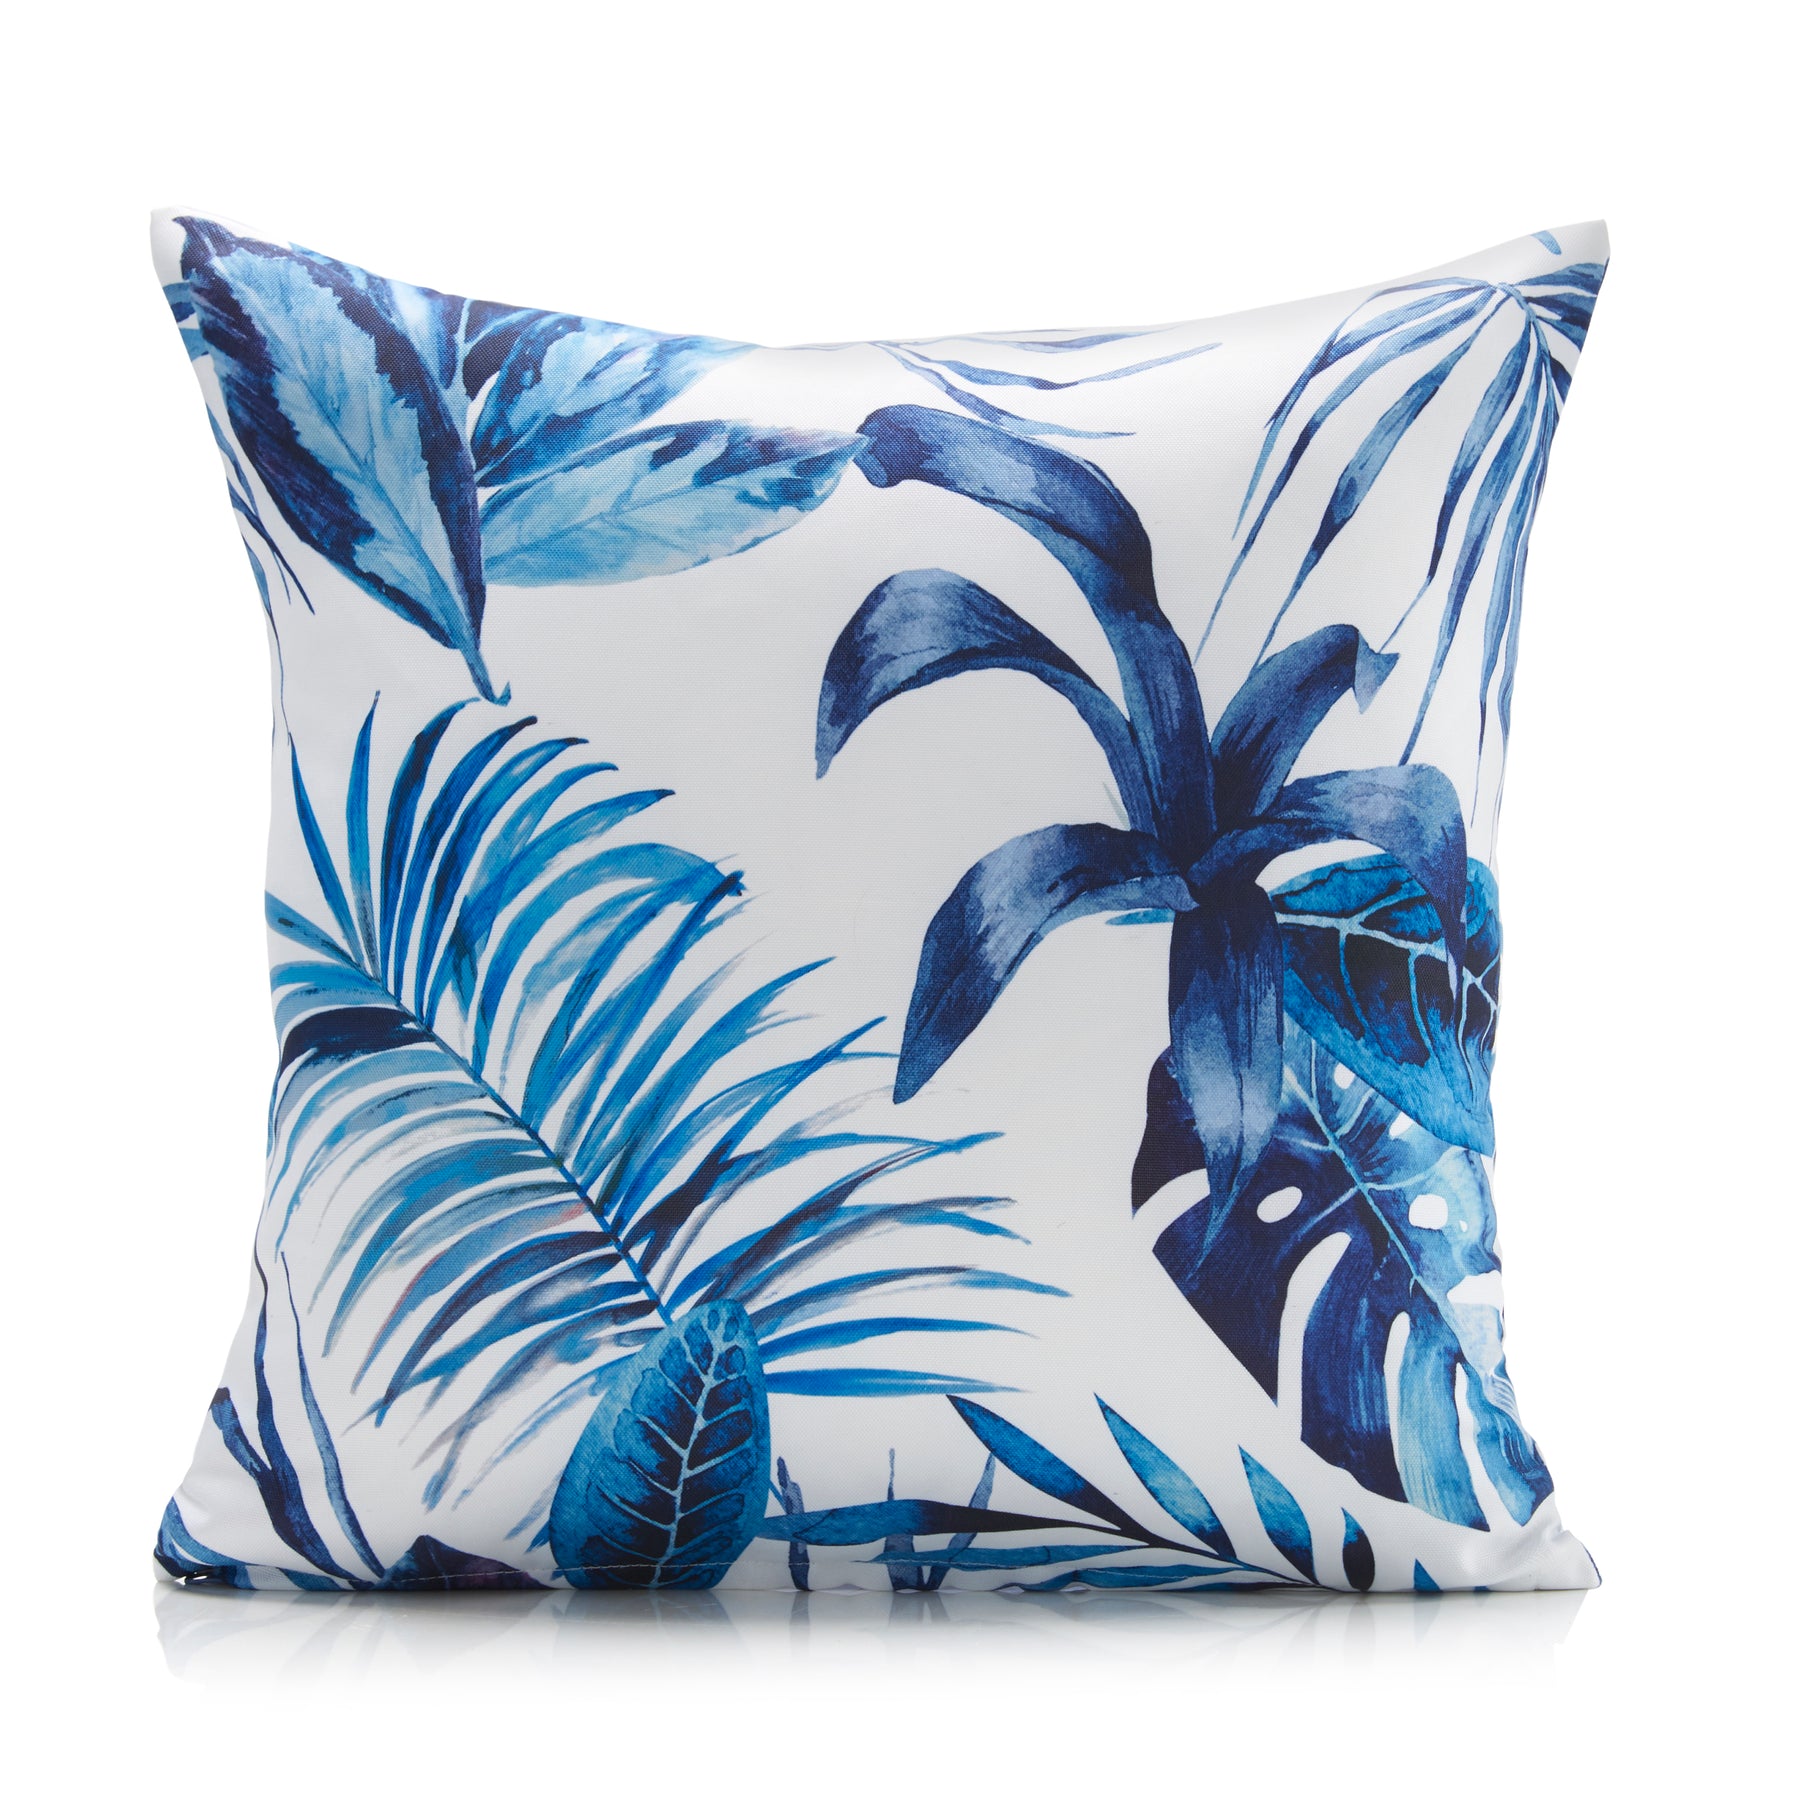 Tropical Water Resistant Outdoor Filled Cushion 46cm x 46cm Blue